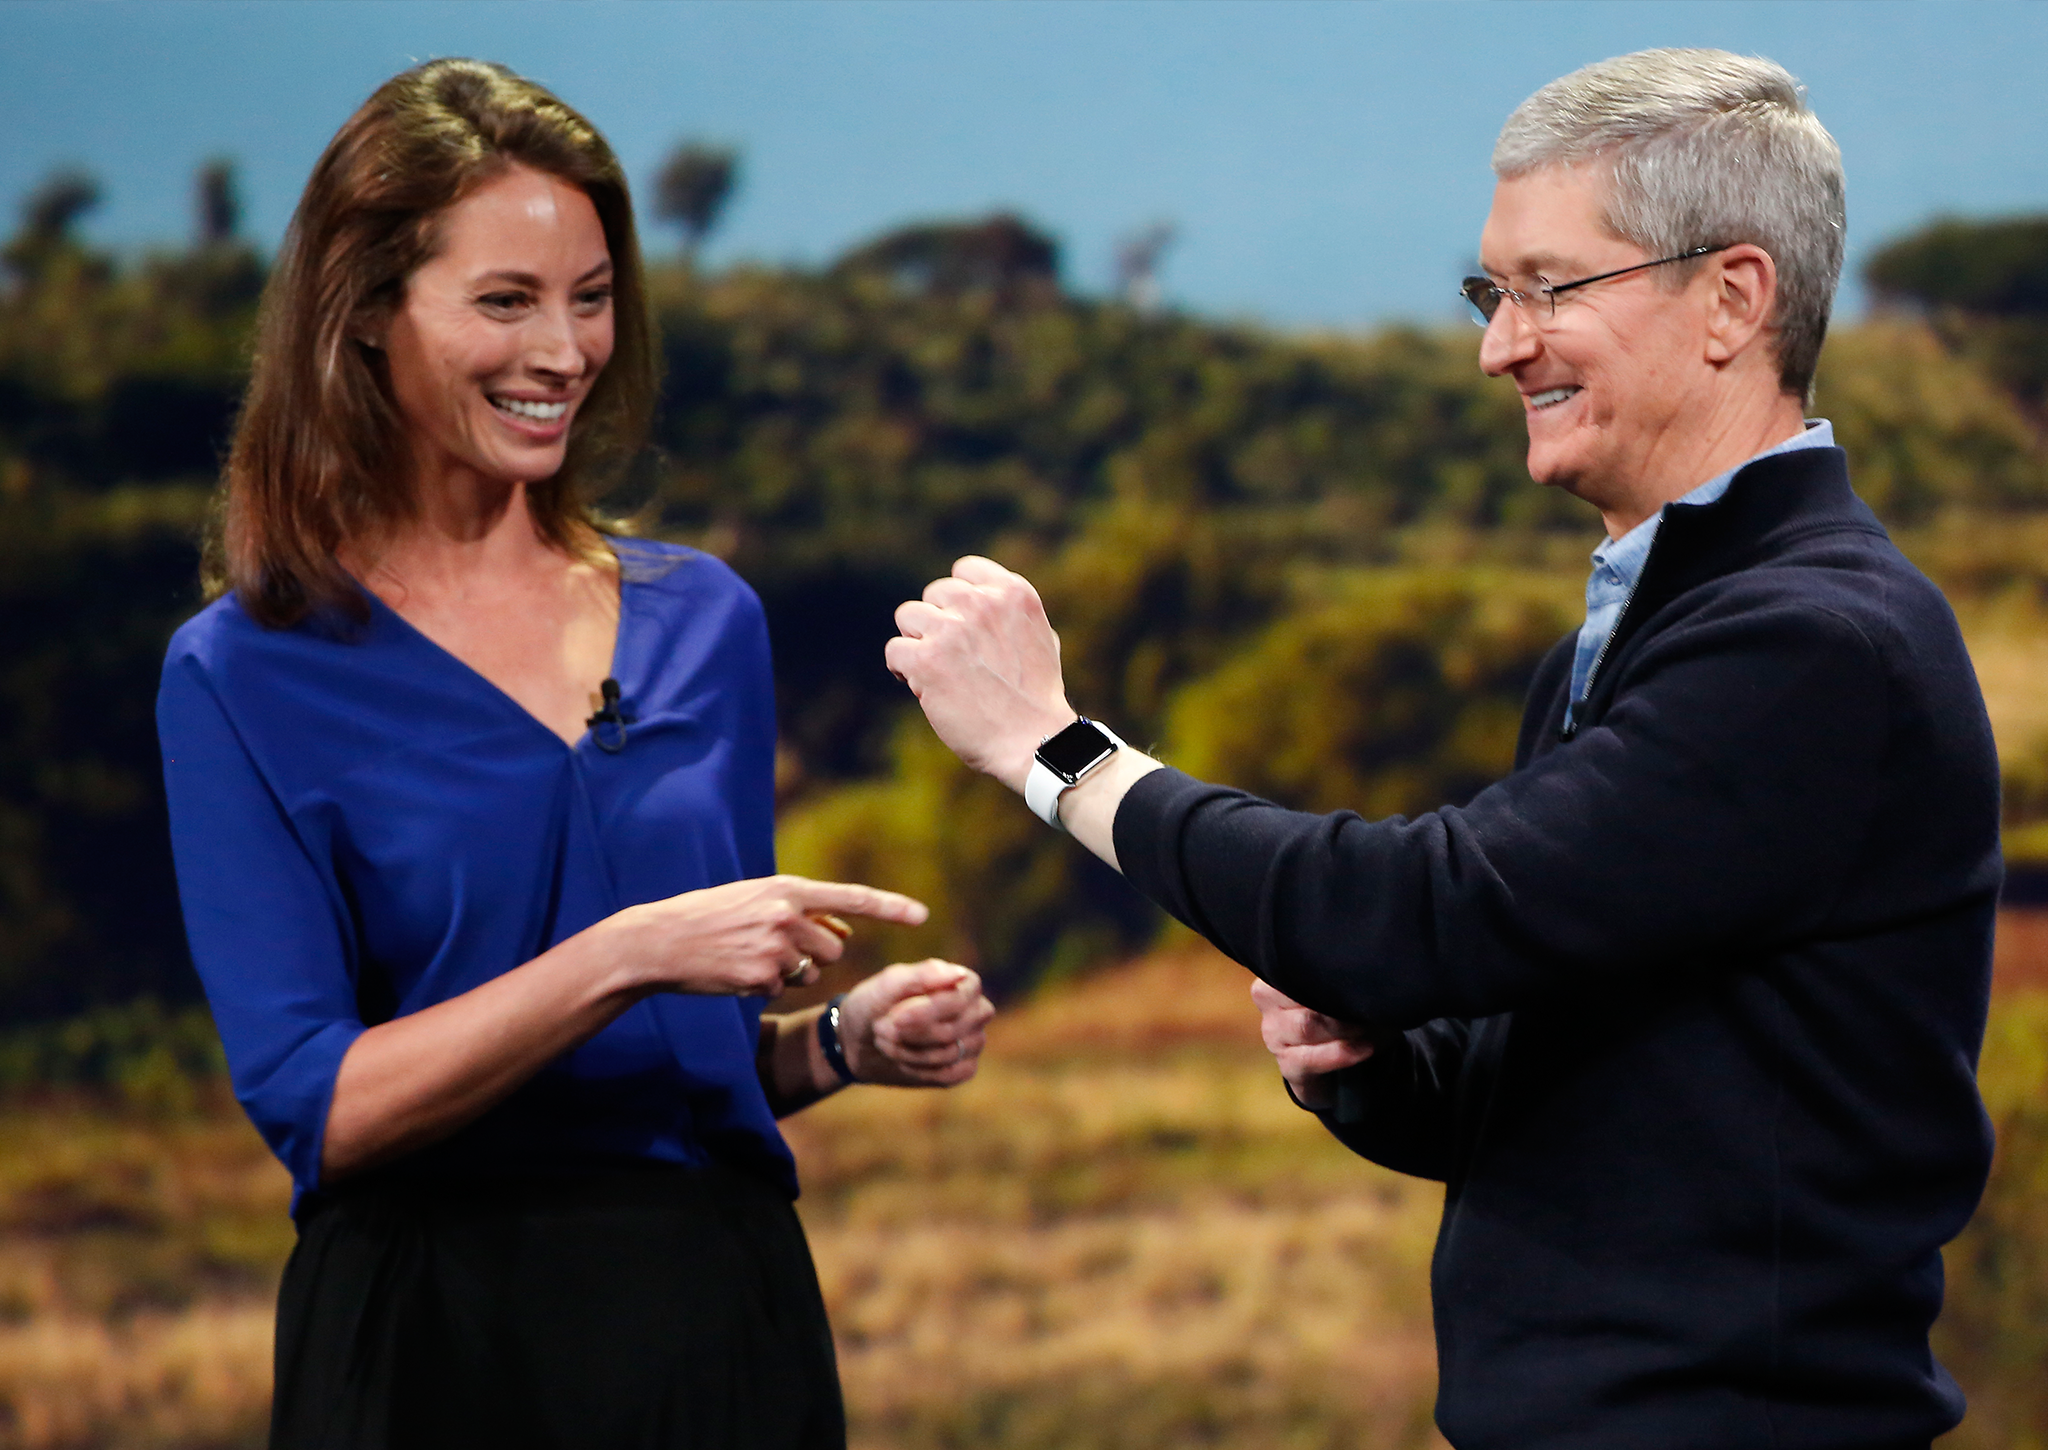 The Apple Watch also allows its wearer to transport themselves into a desert with the model Christy Turlington